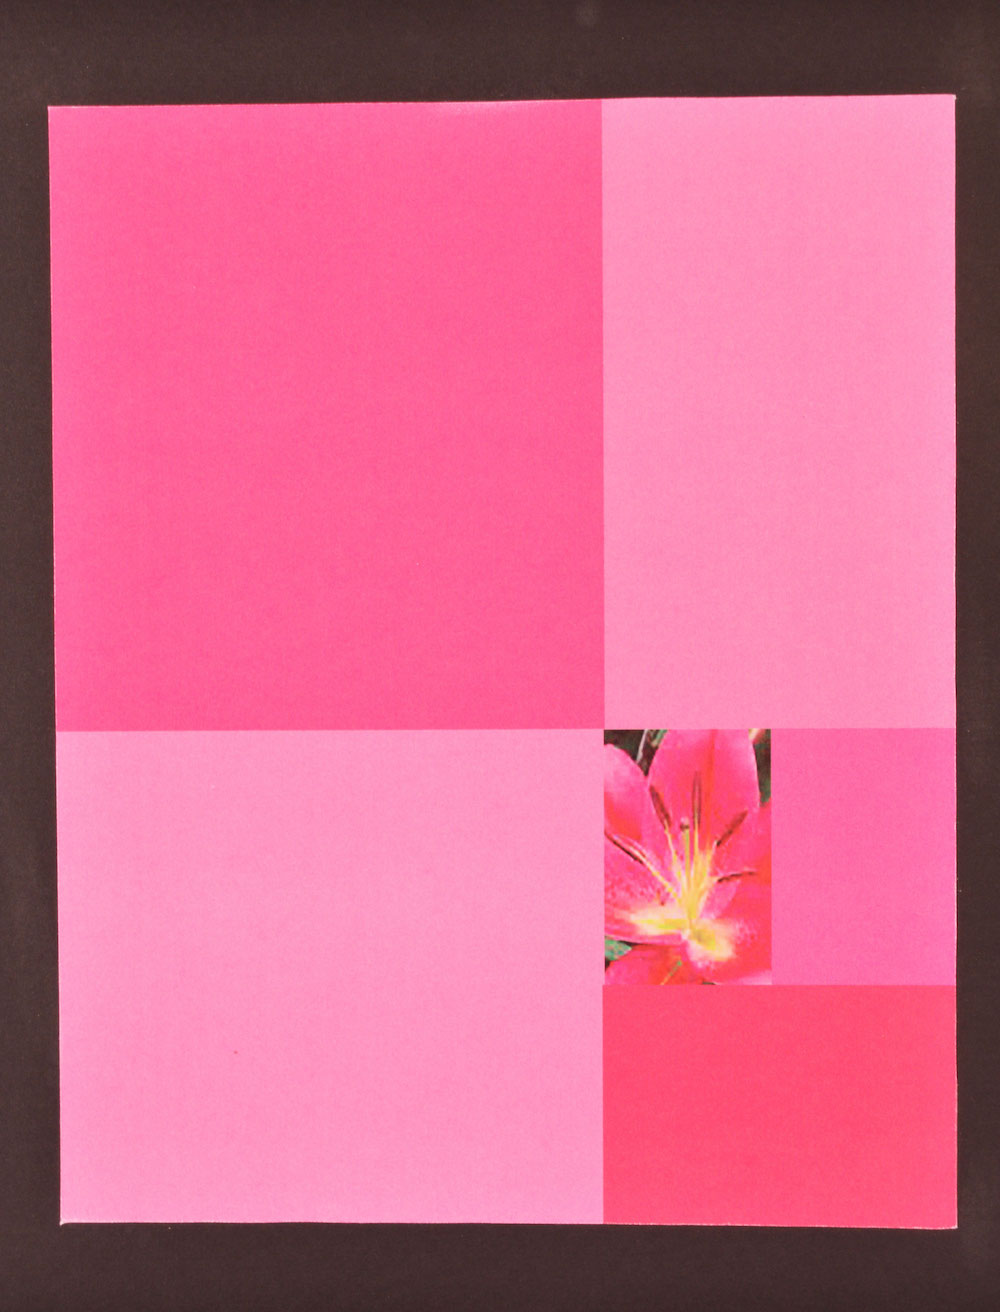 Image collage of various shades of pink. One seciton appears to look like a flower. 